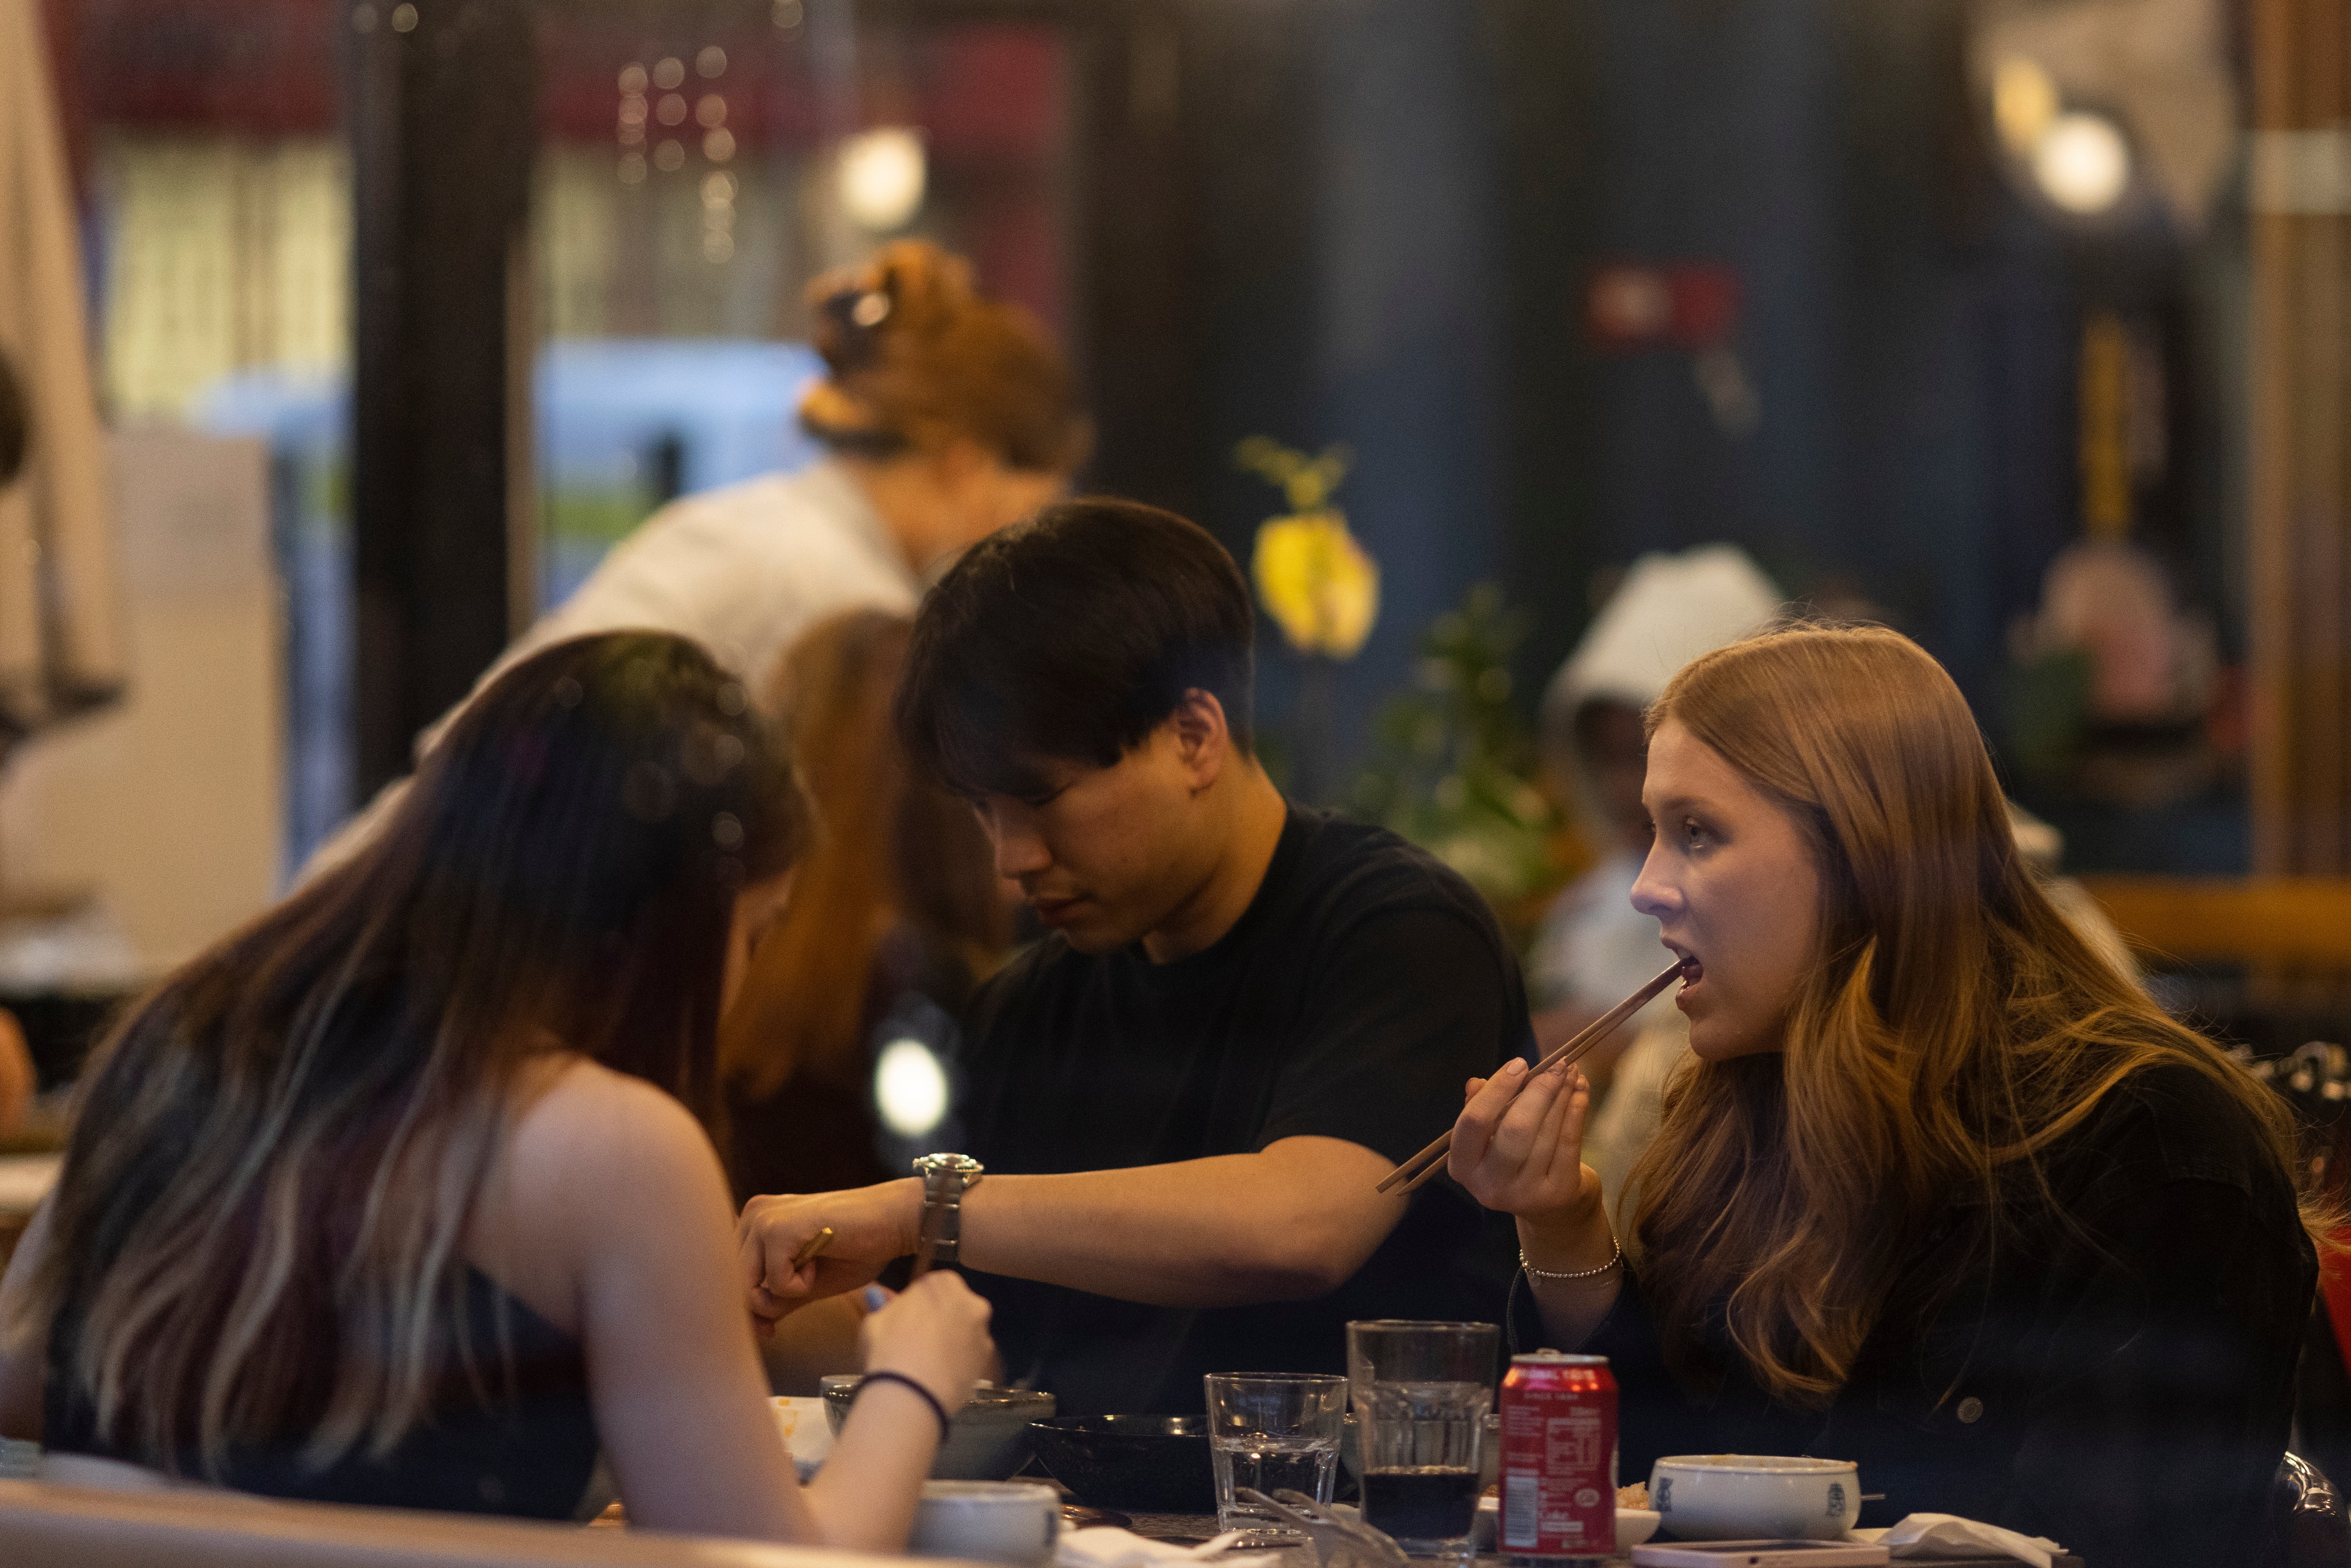 Diners at a Soho restaurant on May 17, 2021 in London, United Kingdom after restrictions were eased